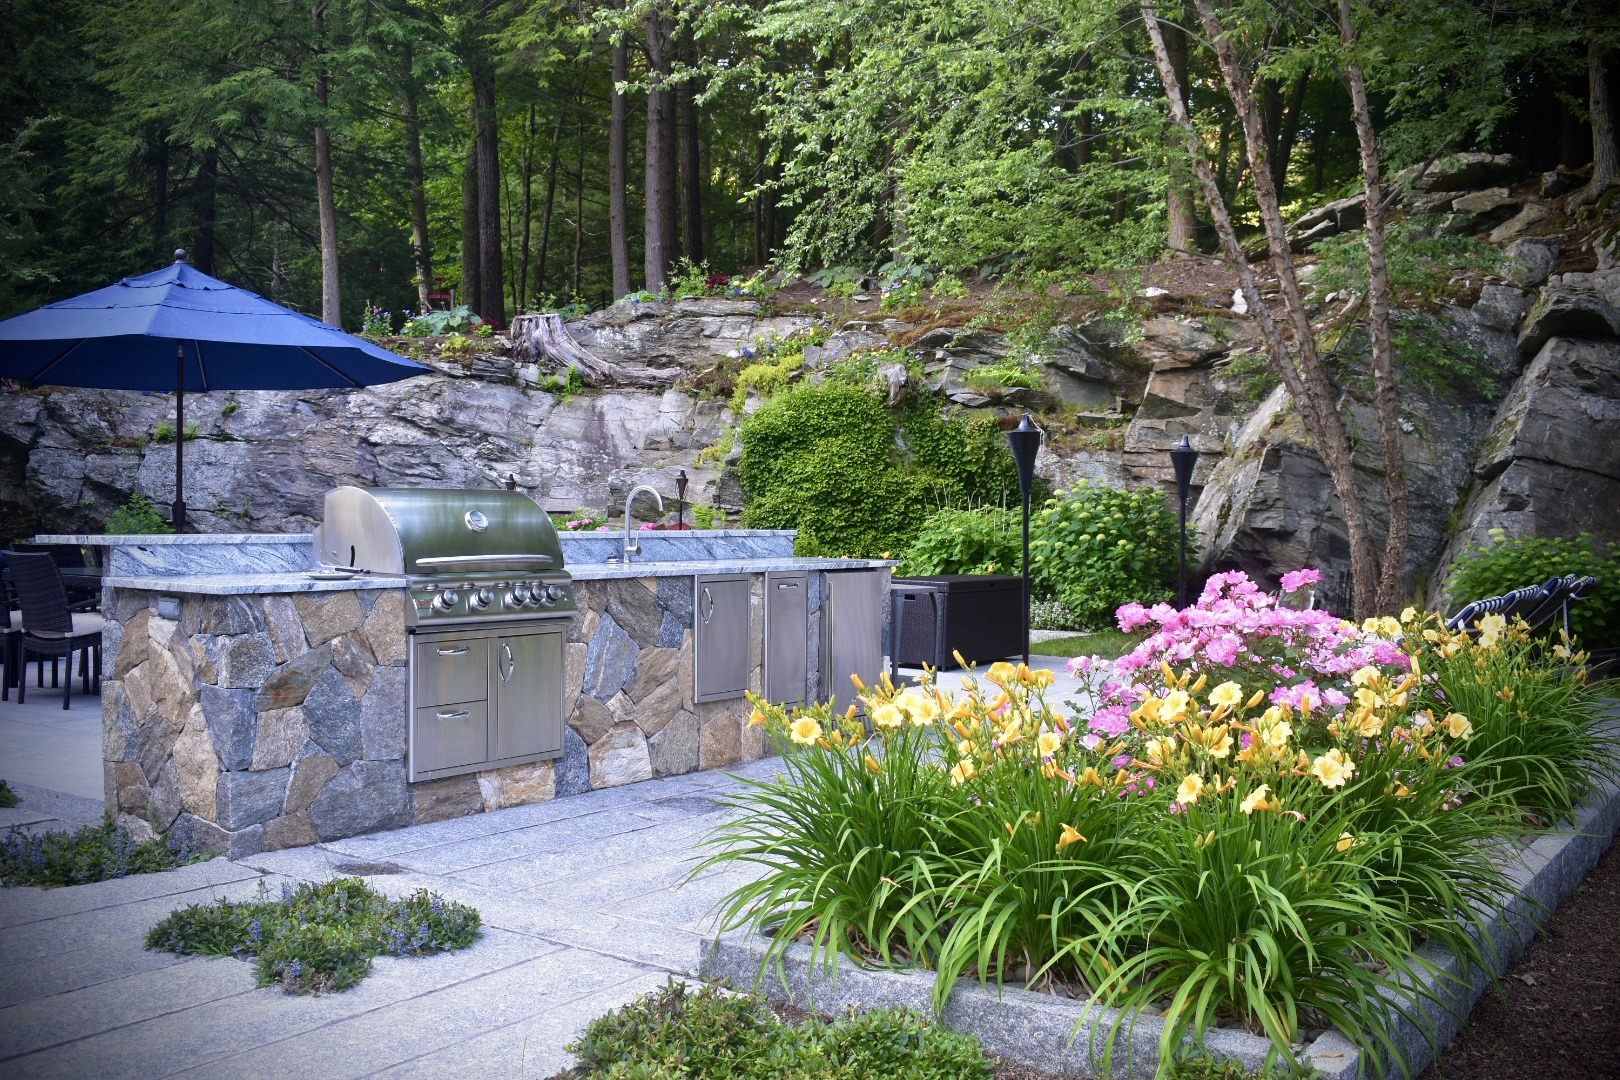 An outdoor kitchen with a built-in grill and countertop set against a backdrop of a natural rock formation, surrounded by a garden with colorful flowers.